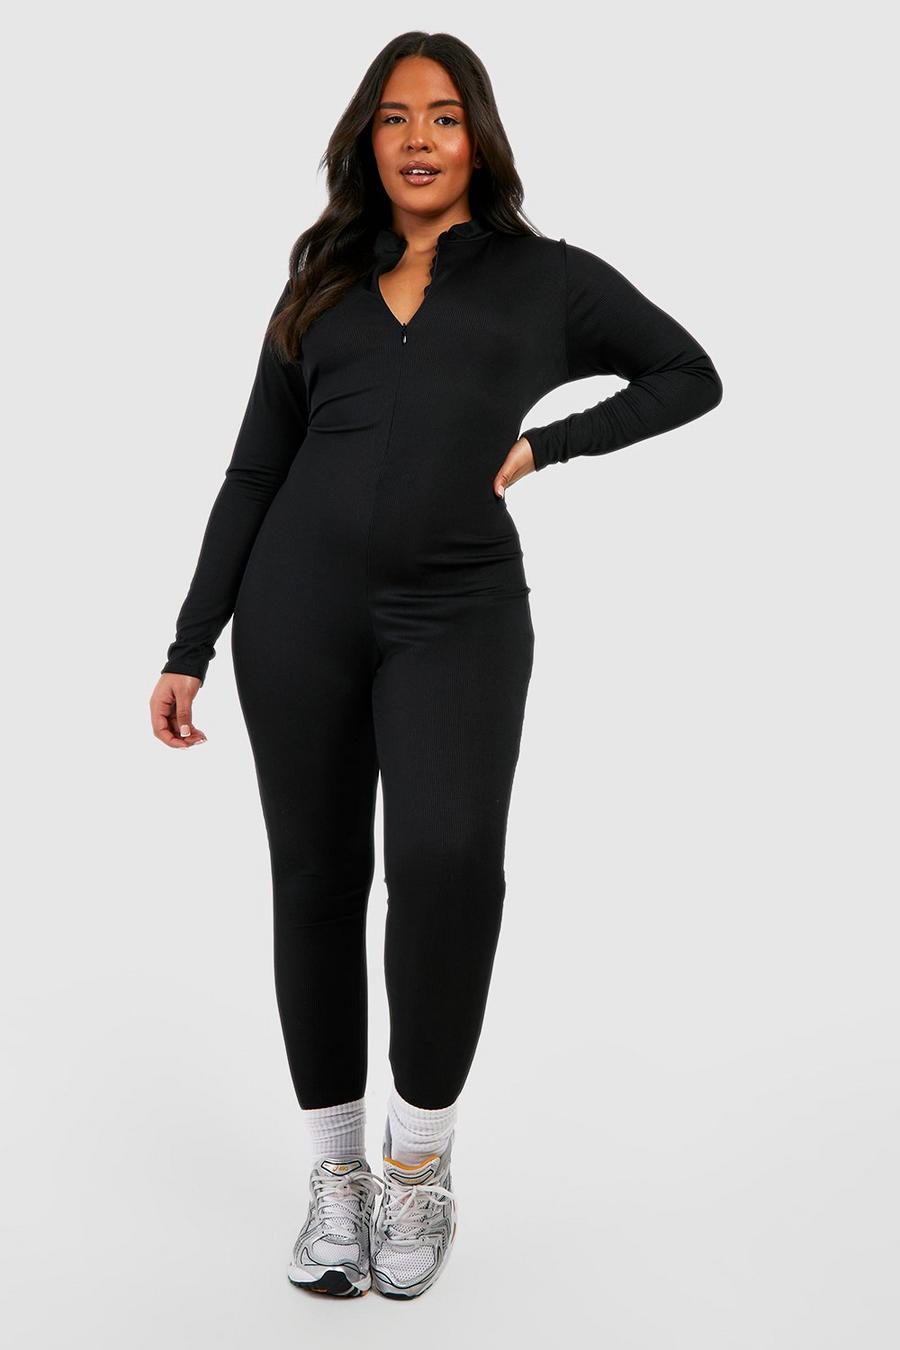 Backless Multiple Pockets Ankle Length Casual Tapered Plus Size Jumpsuit